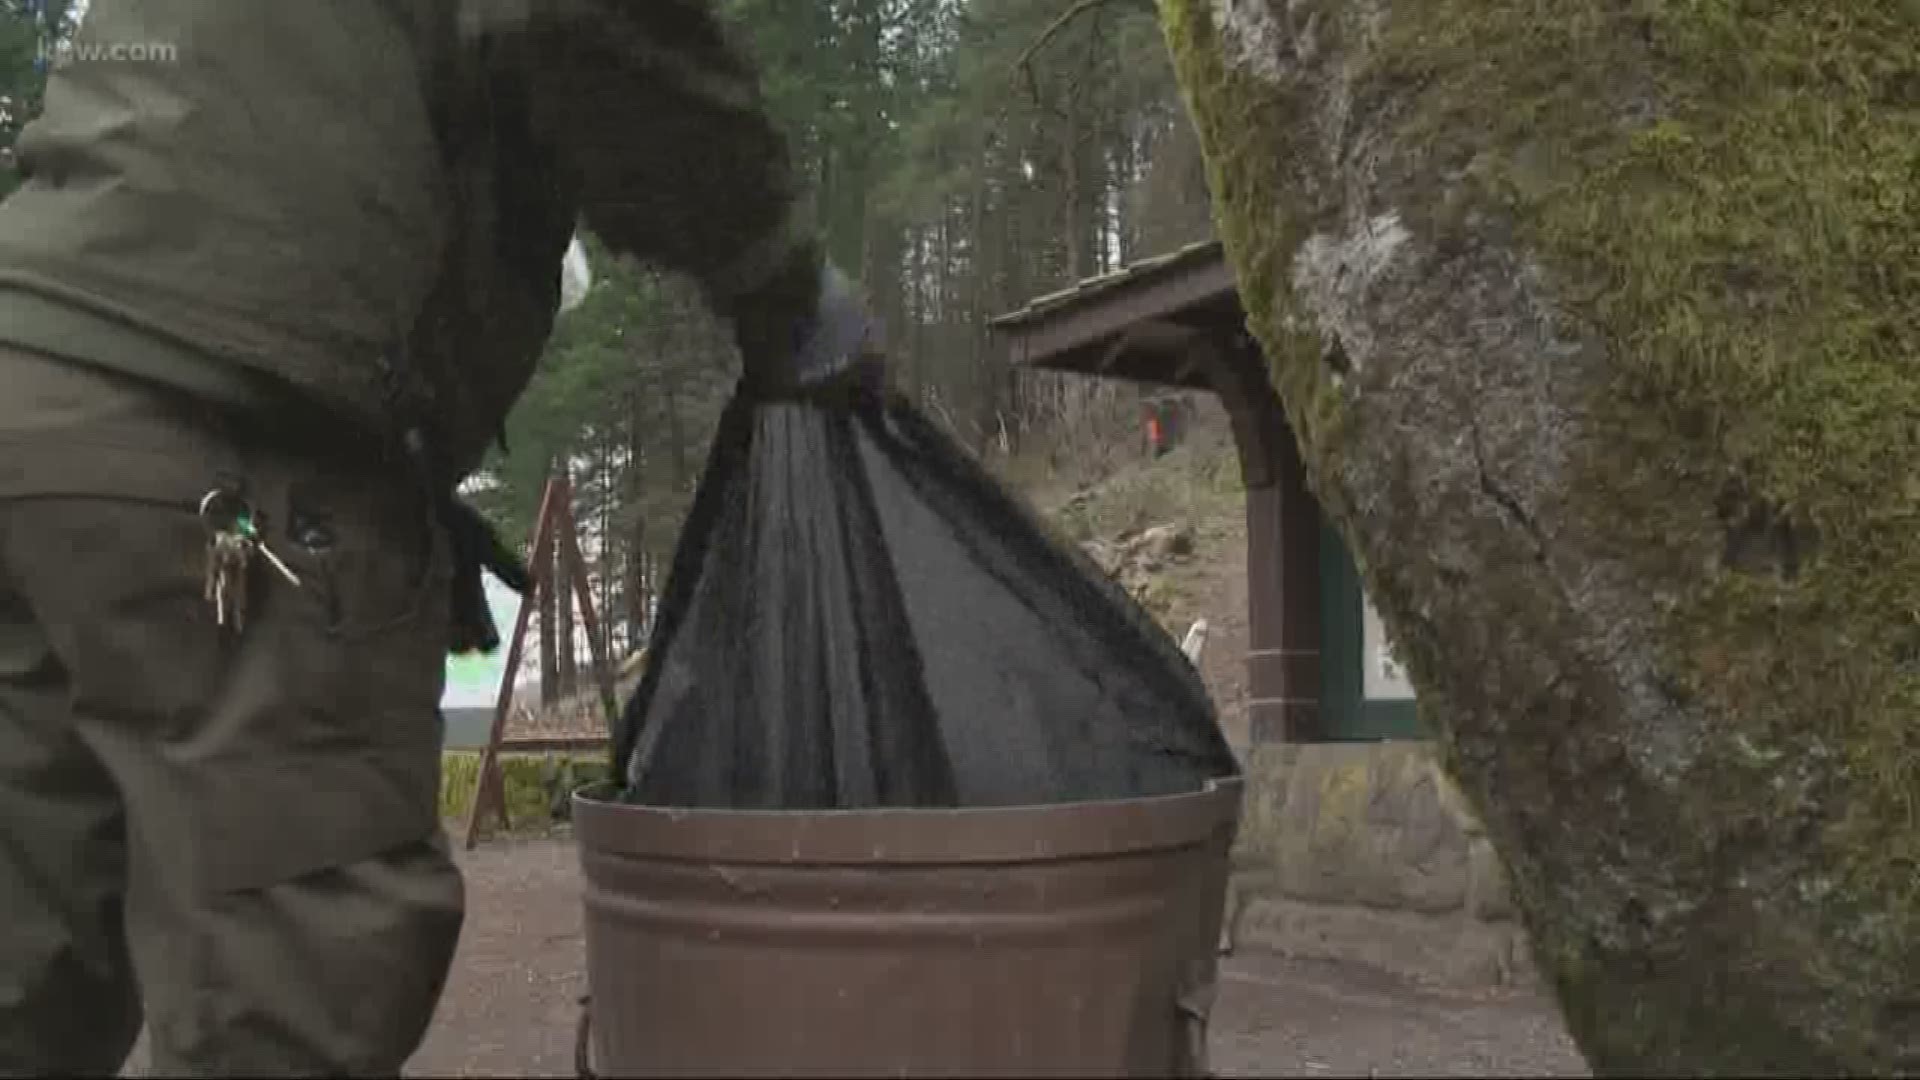 State park rangers are helping keep federal land clean during the shutdown.